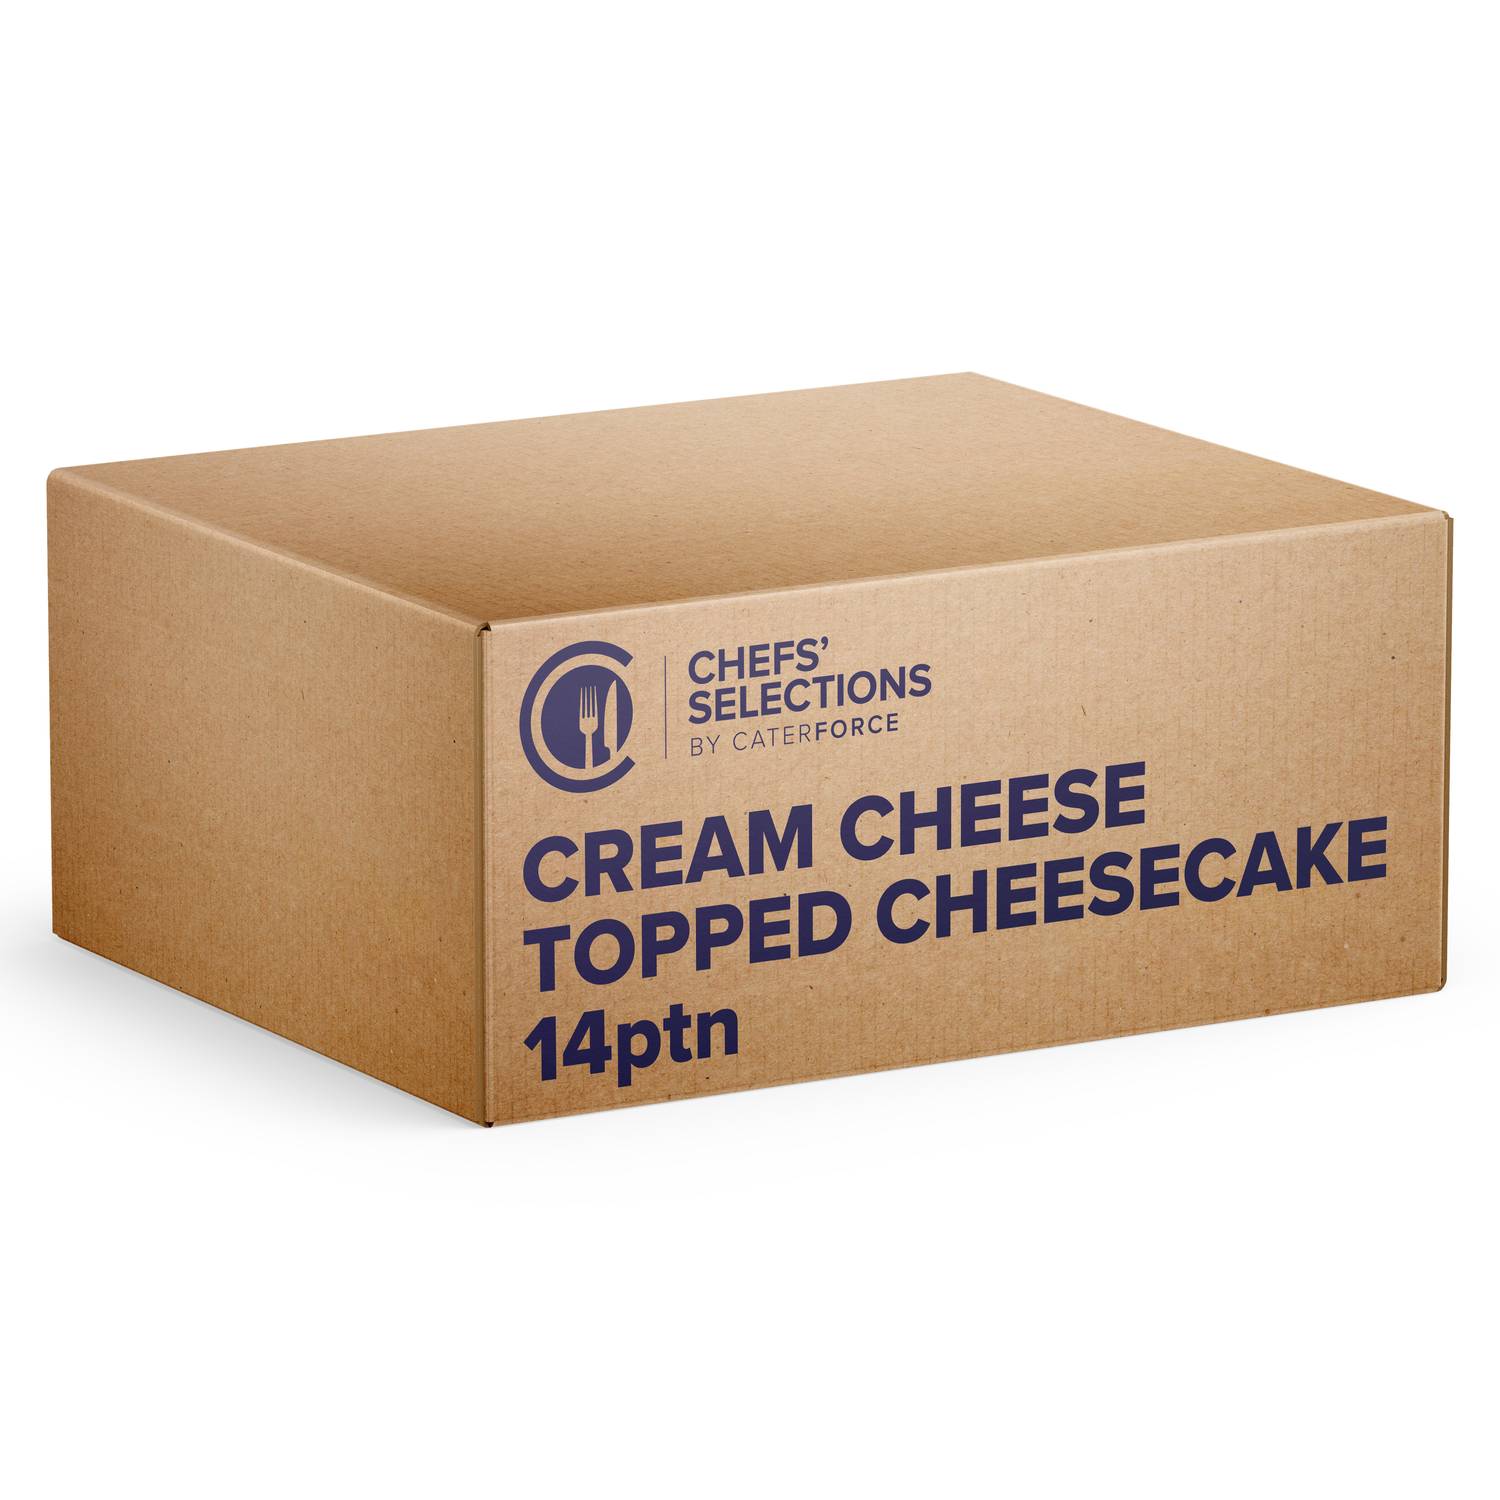 Chefs’ Selections Cream Cheese Topped Cheesecake (1 x 14p/ptn)